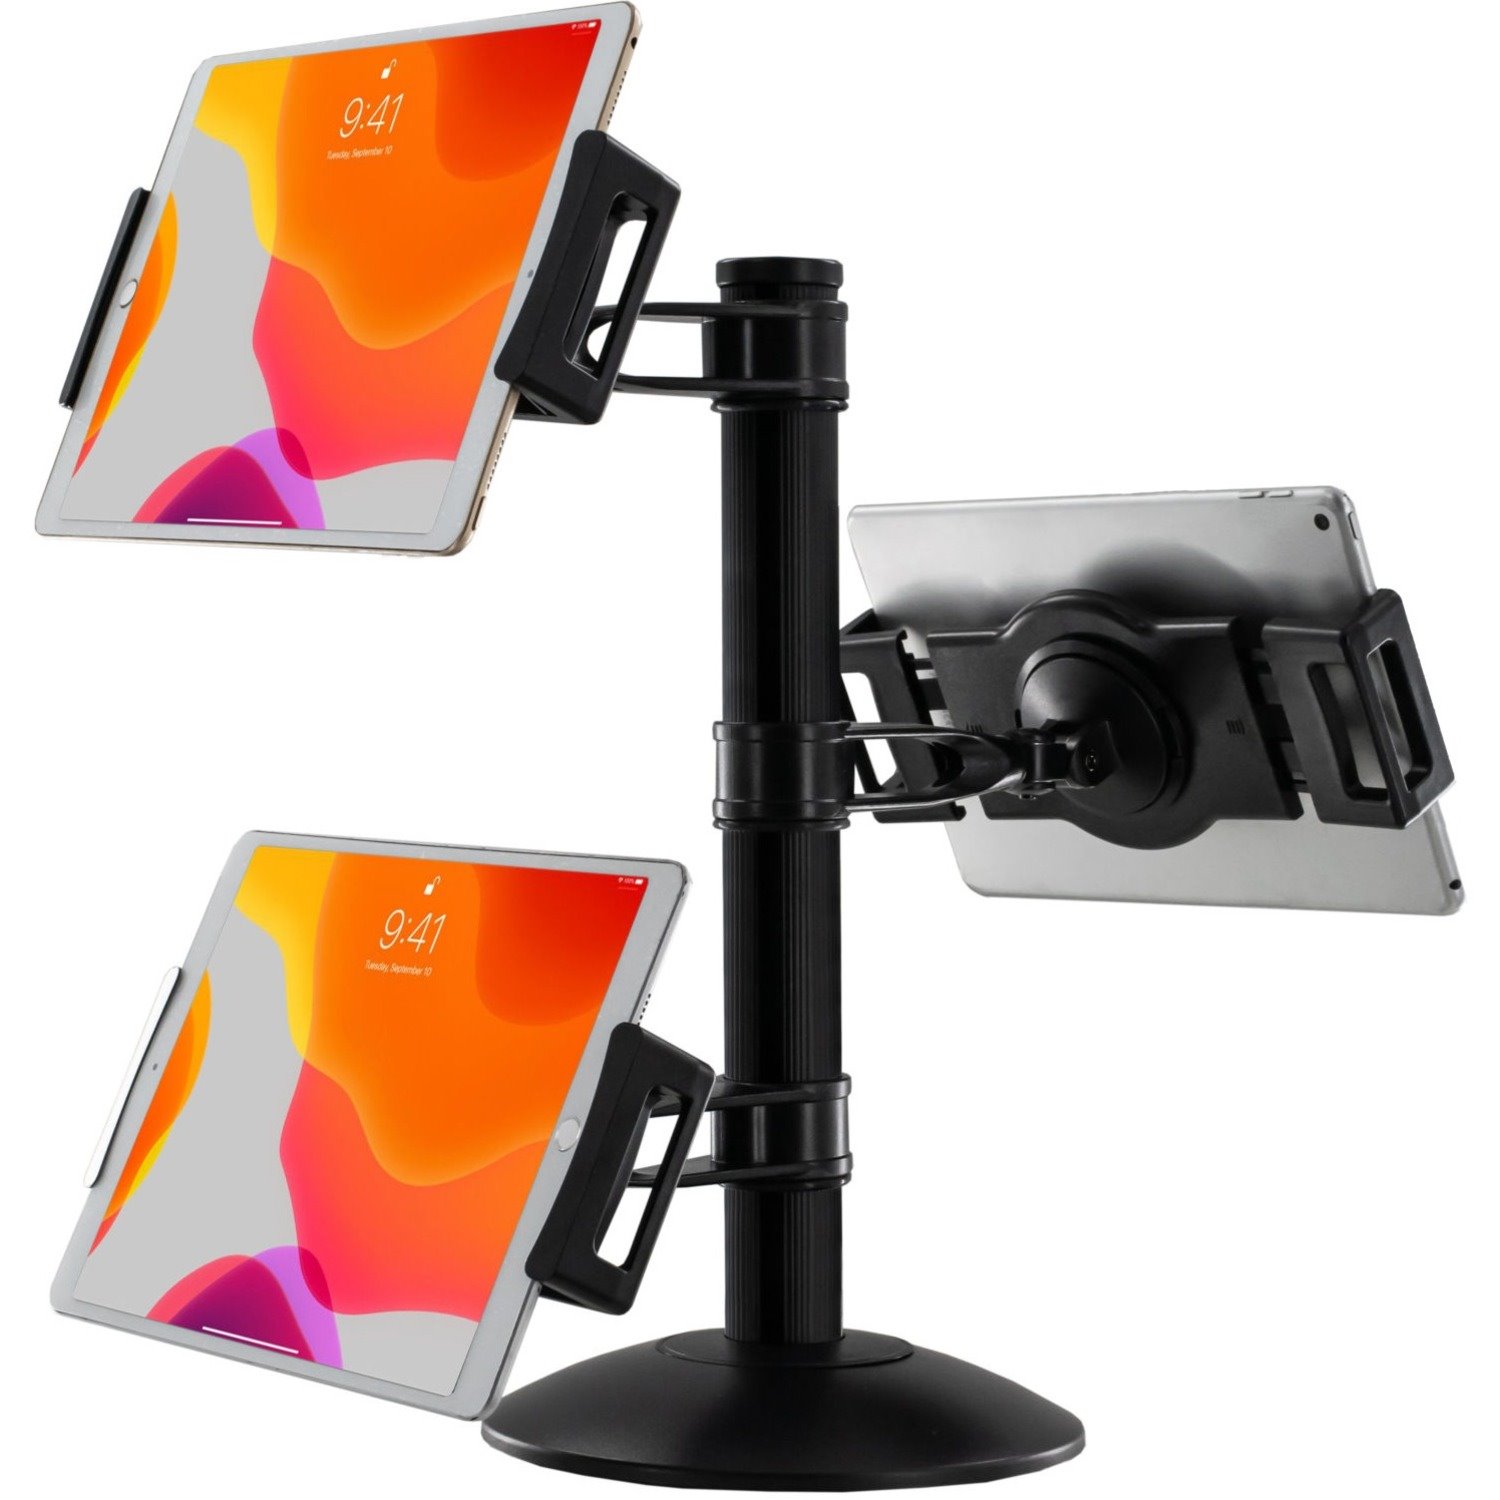 CTA Digital Quick-Connect Universal Trio Tablet Mount with Height-Adjustable Arms